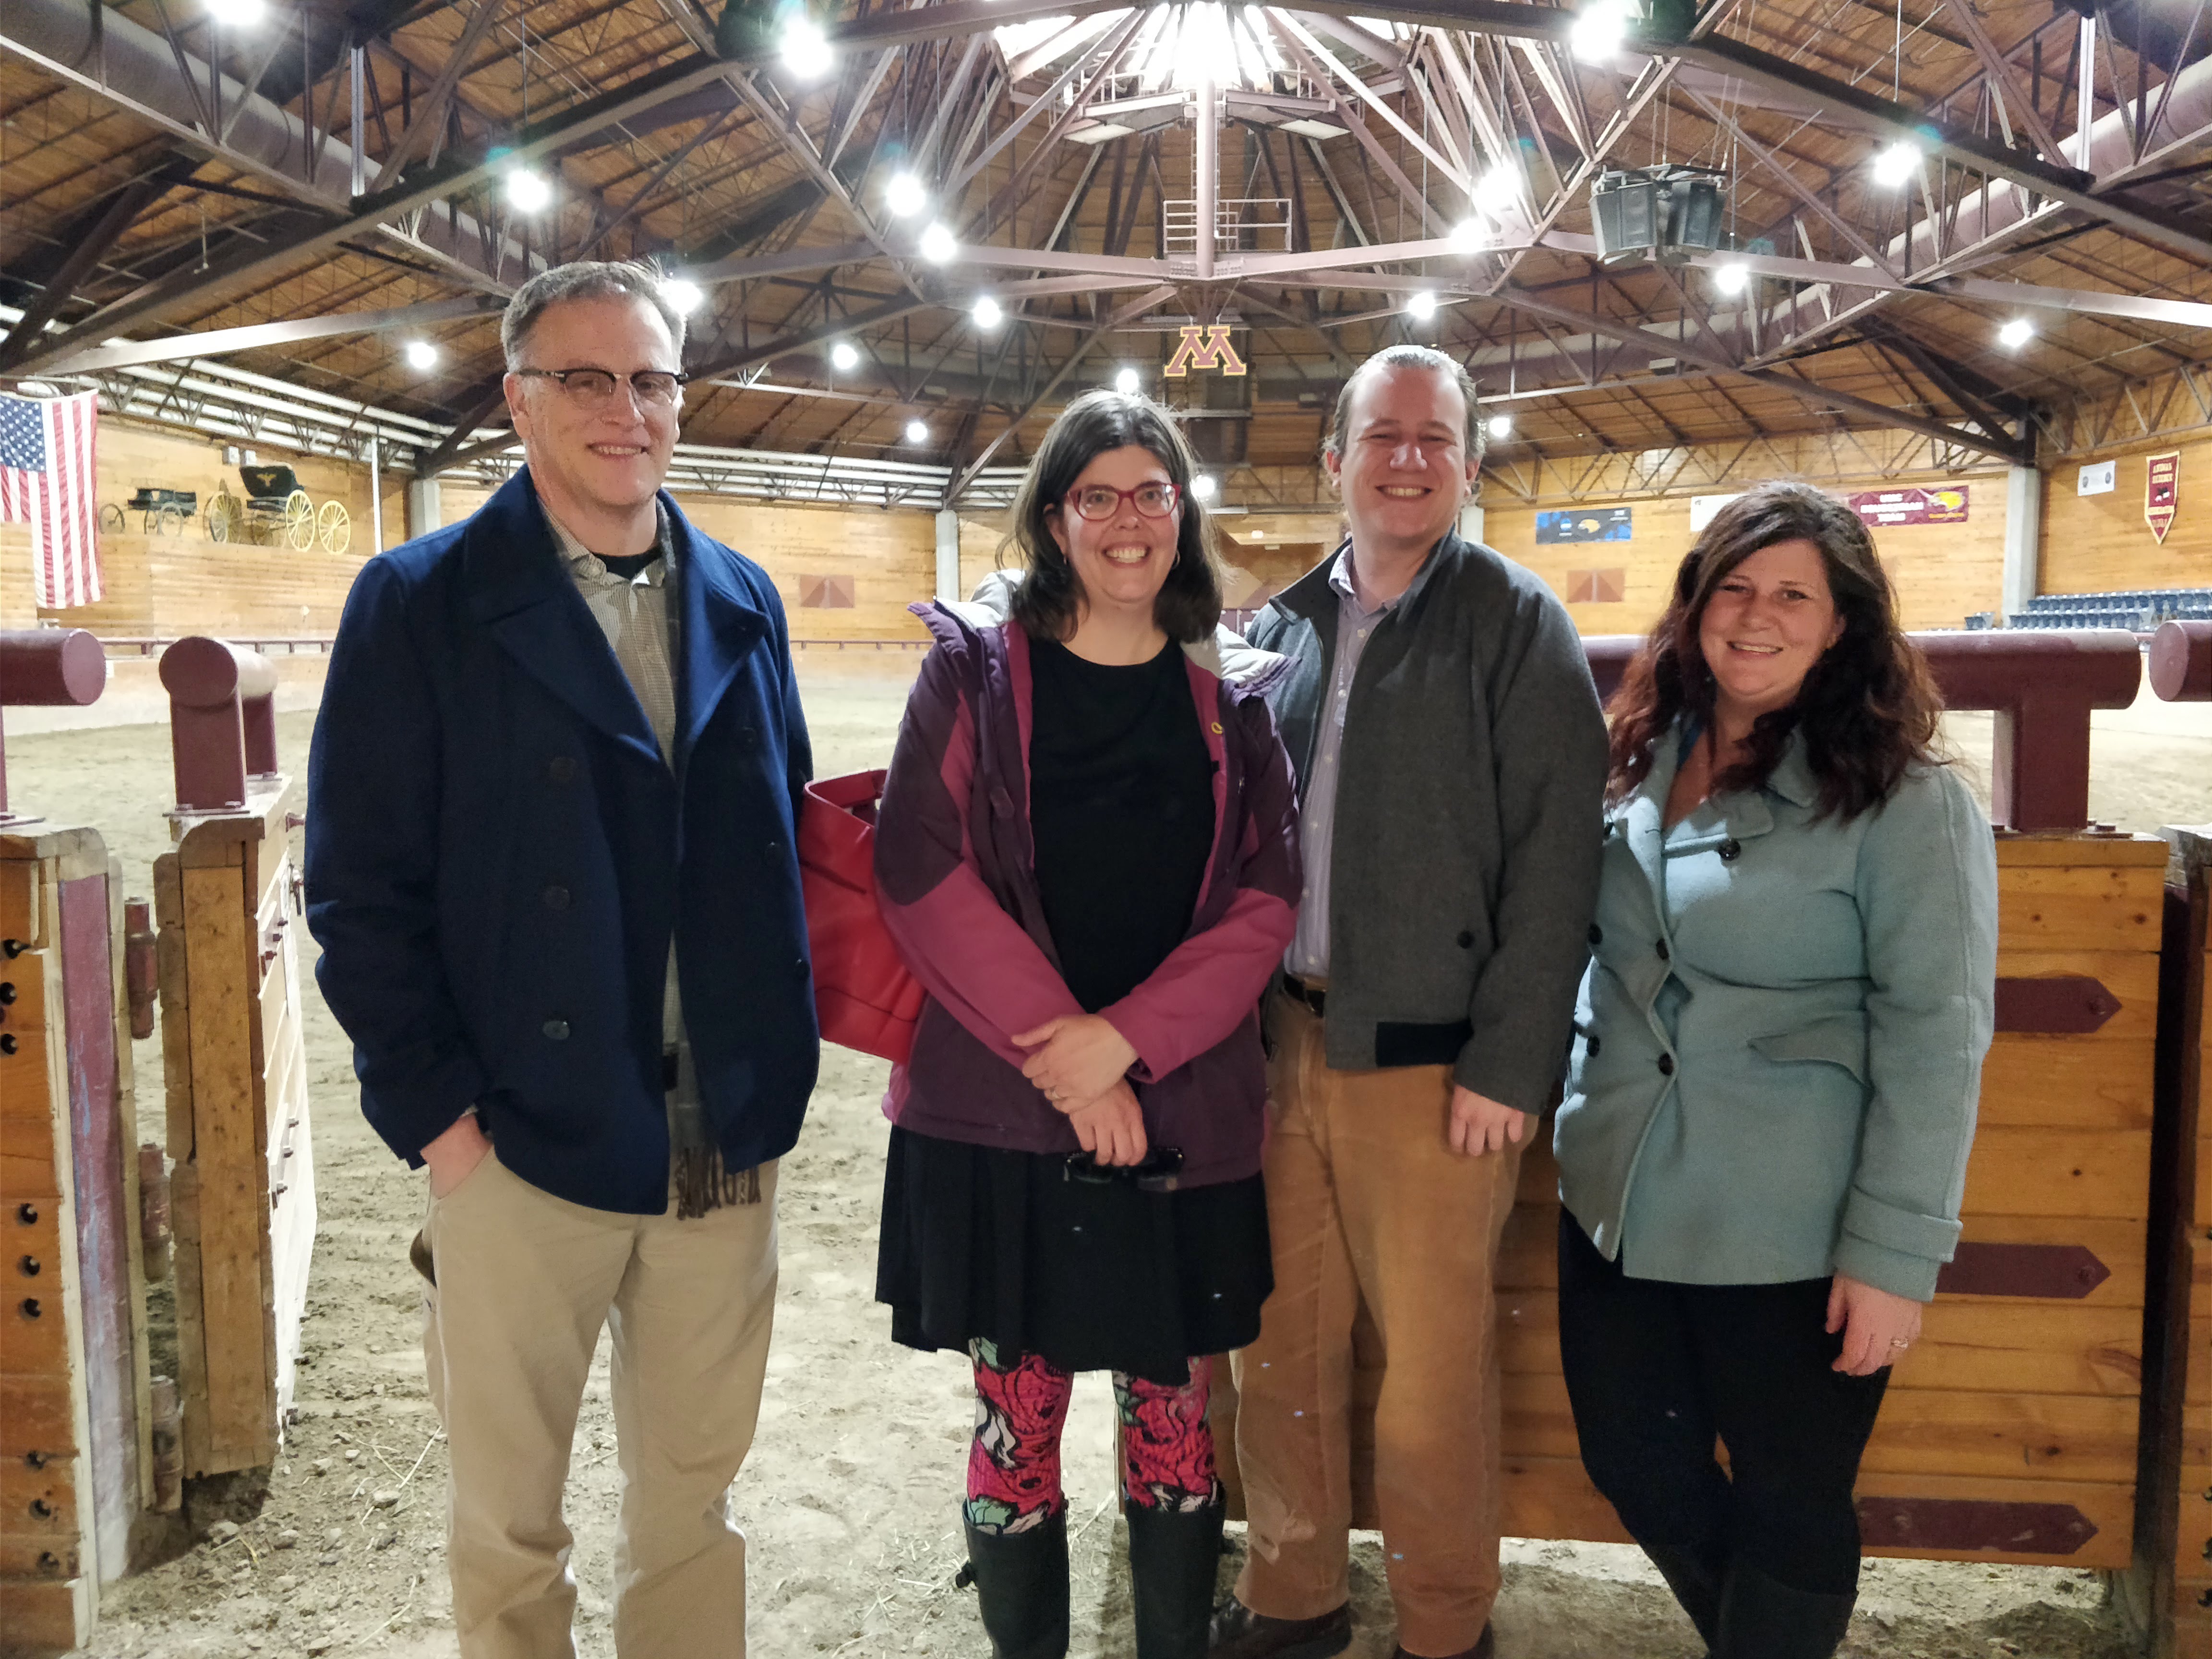 Ray Muno, Ann Hagen, Ian Ringgenberg, and Becky Nelson pose in the riding arena at the Crookston campus